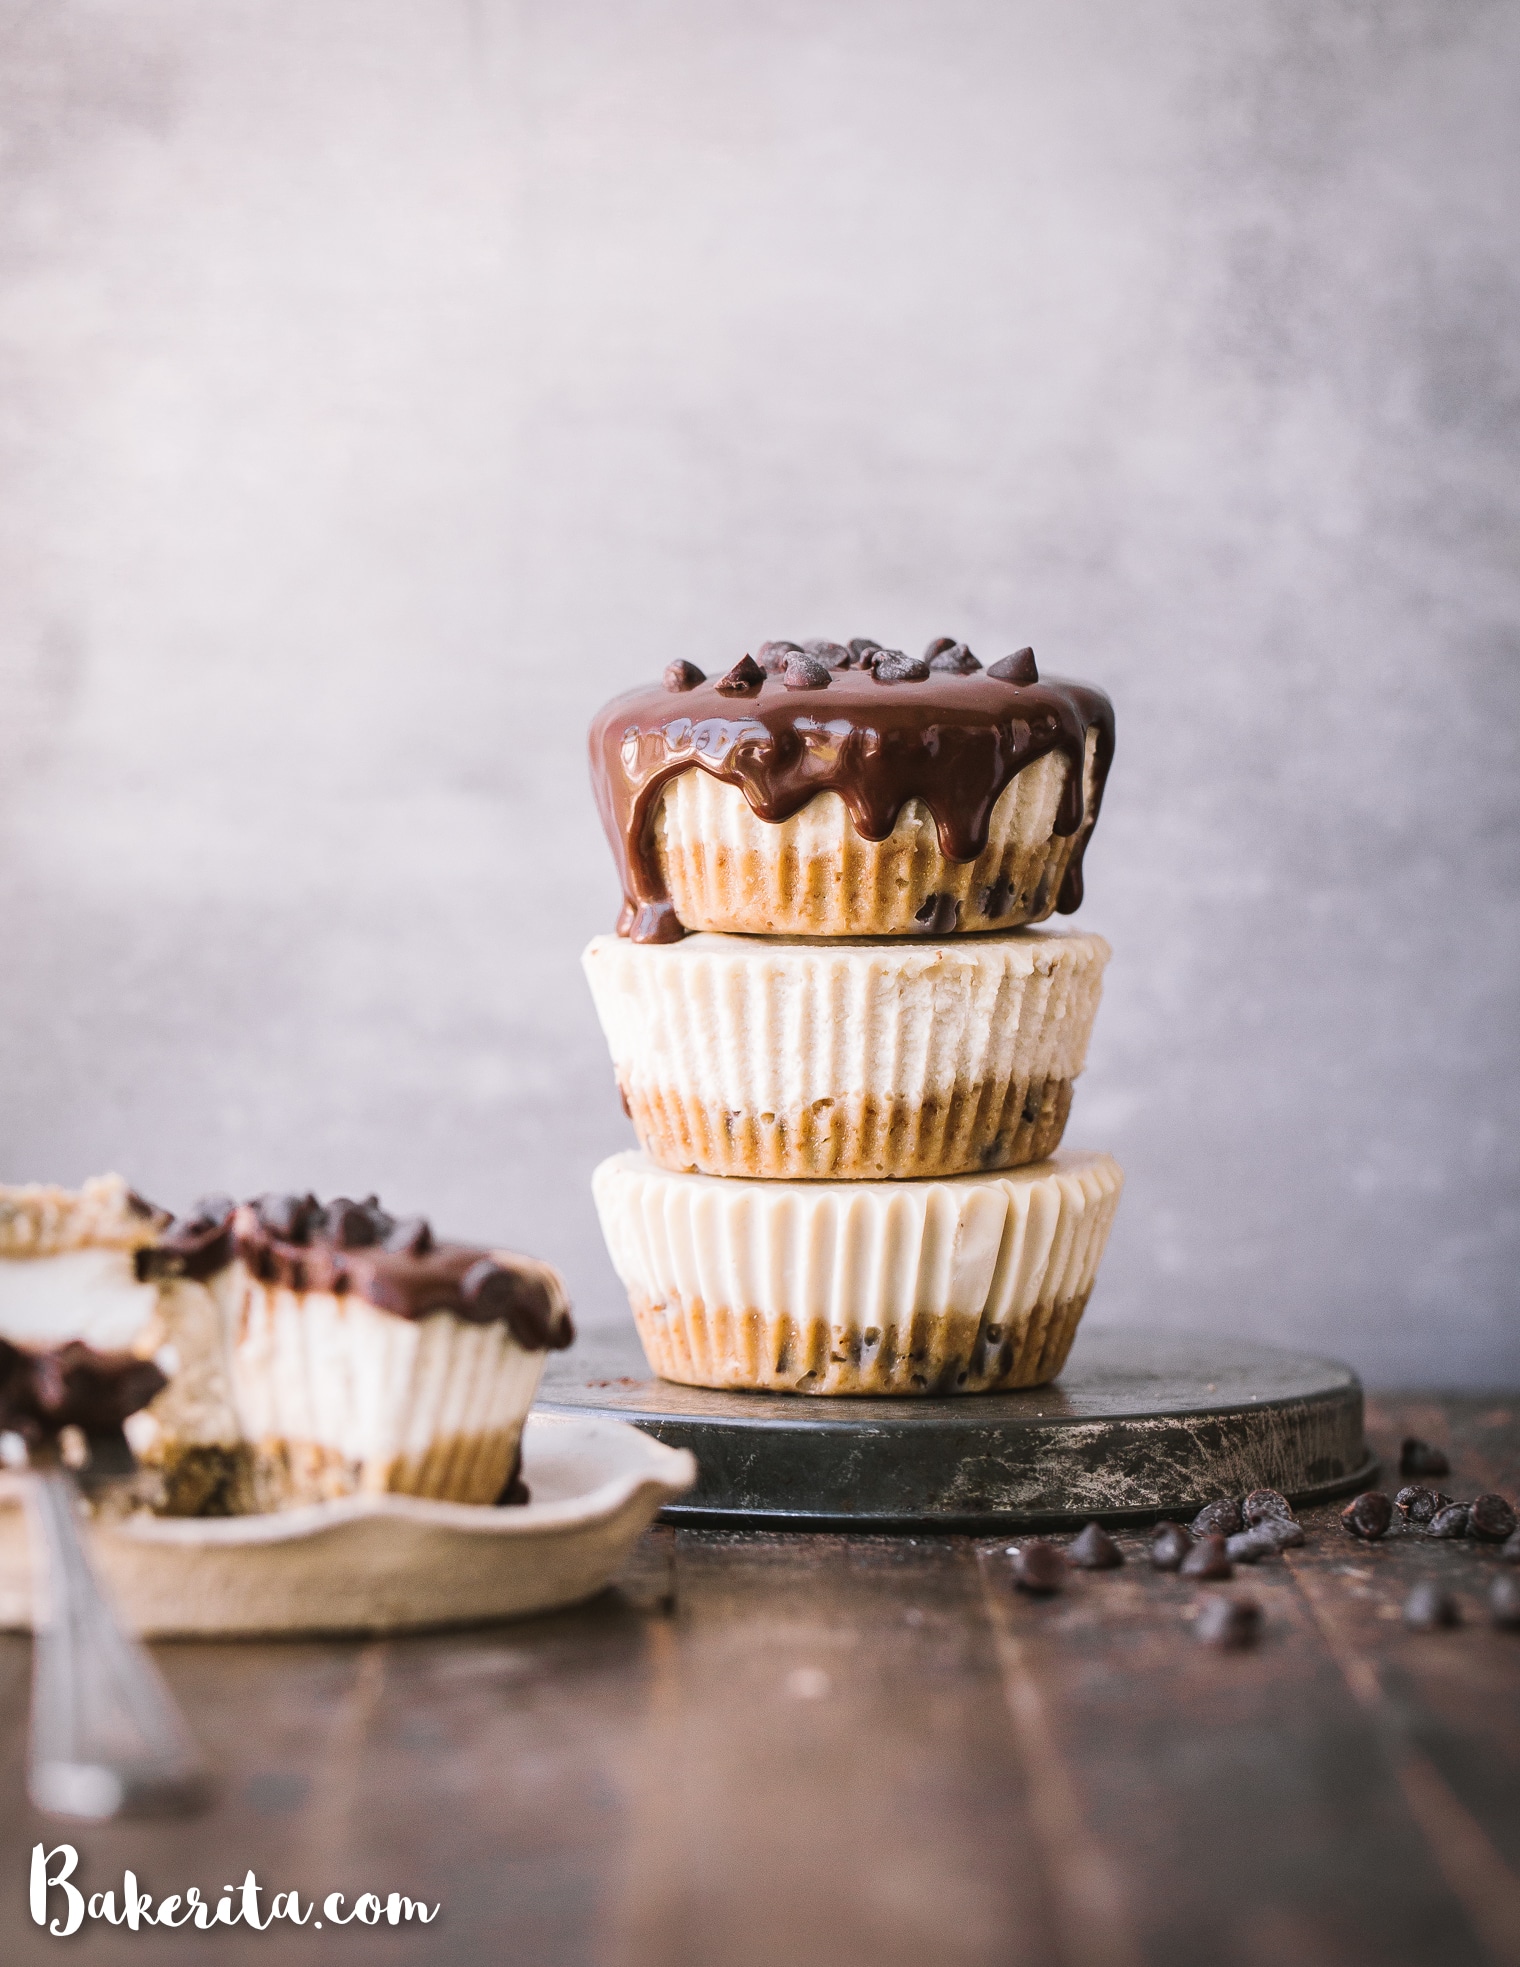 These No-Bake Vegan Chocolate Chip Cookie Dough Cheesecakes have a gluten-free and paleo cookie dough crust with a luscious cashew cheesecake filling. With dripping dark chocolate ganache on top, these make a decadent treat you'll make again and again!